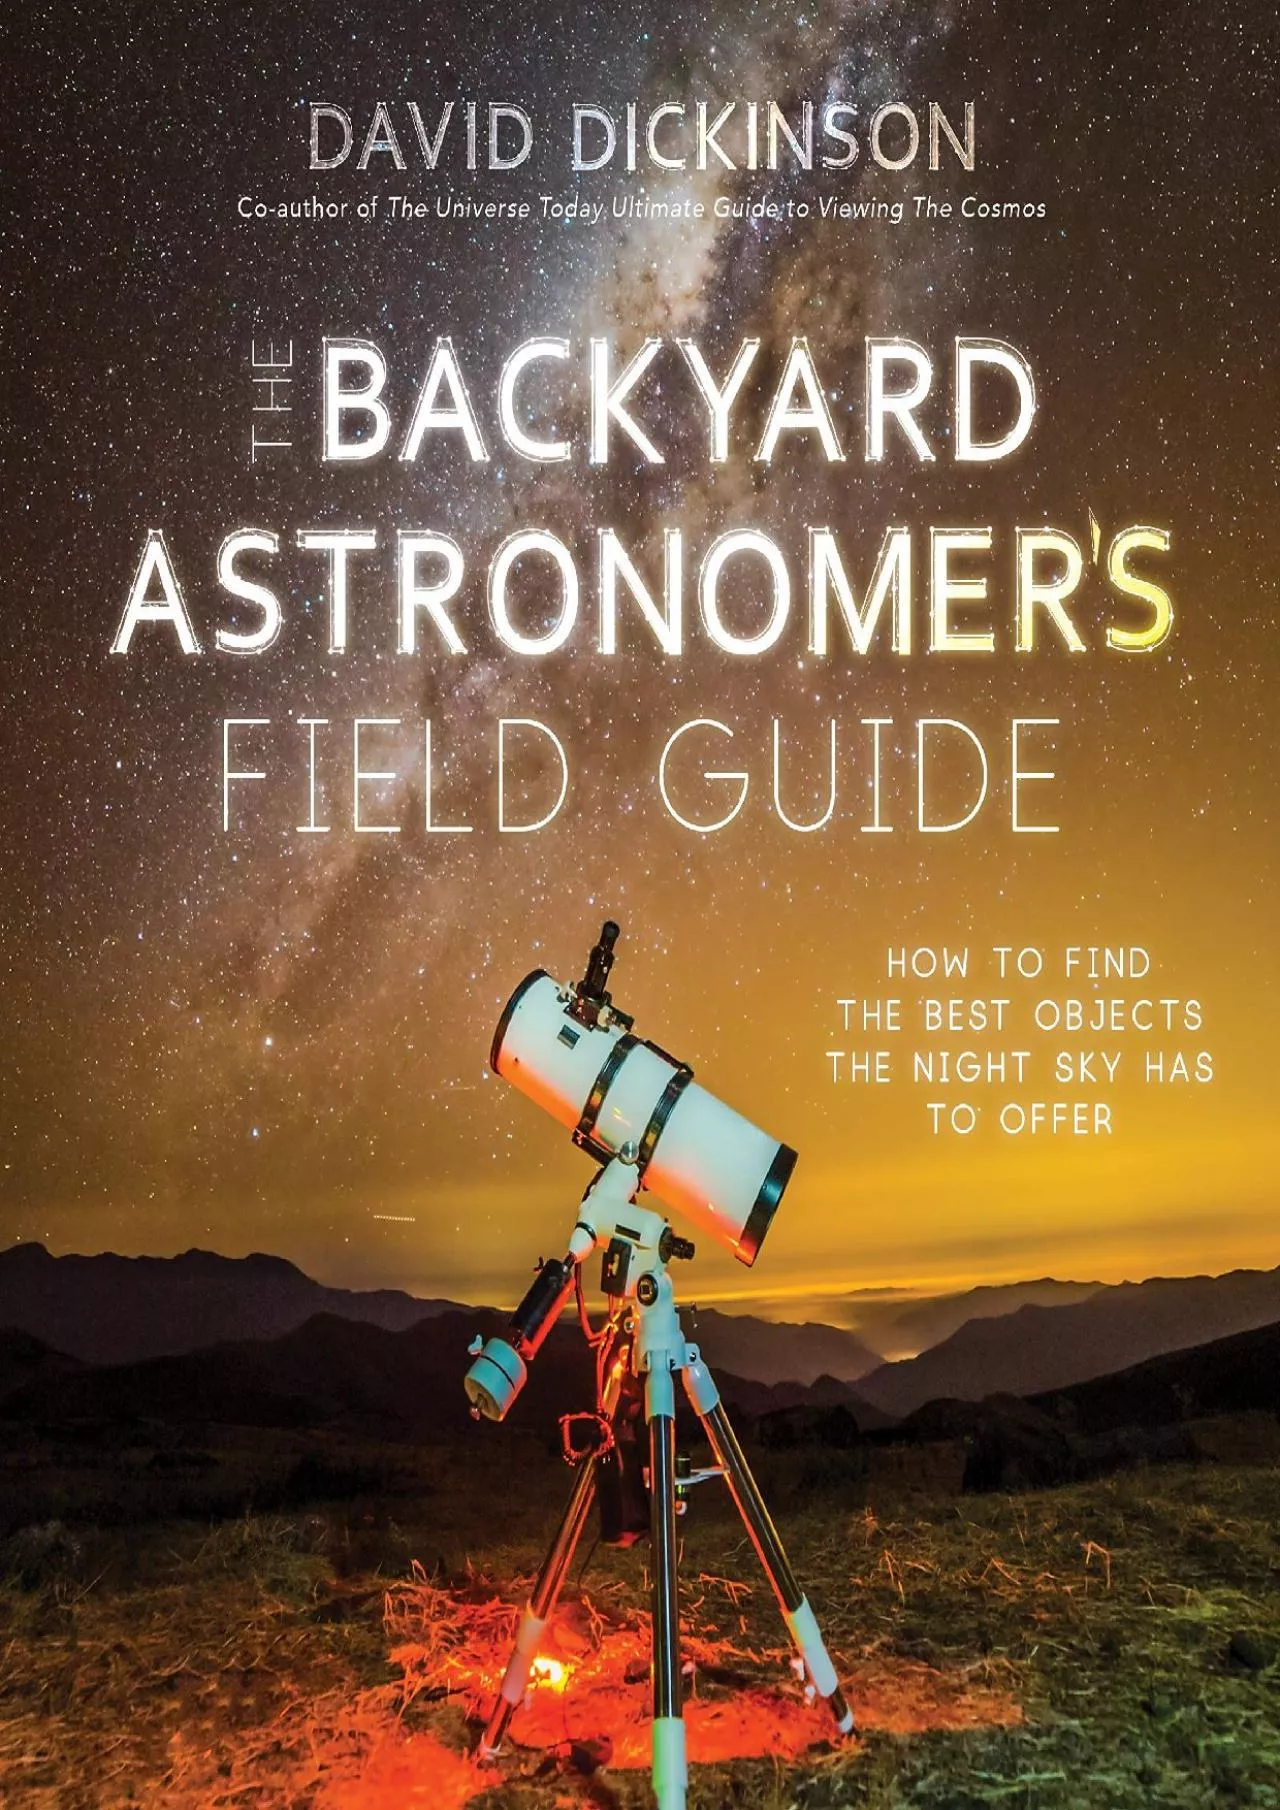 (DOWNLOAD)-The Backyard Astronomer’s Field Guide: How to Find the Best Objects the Night